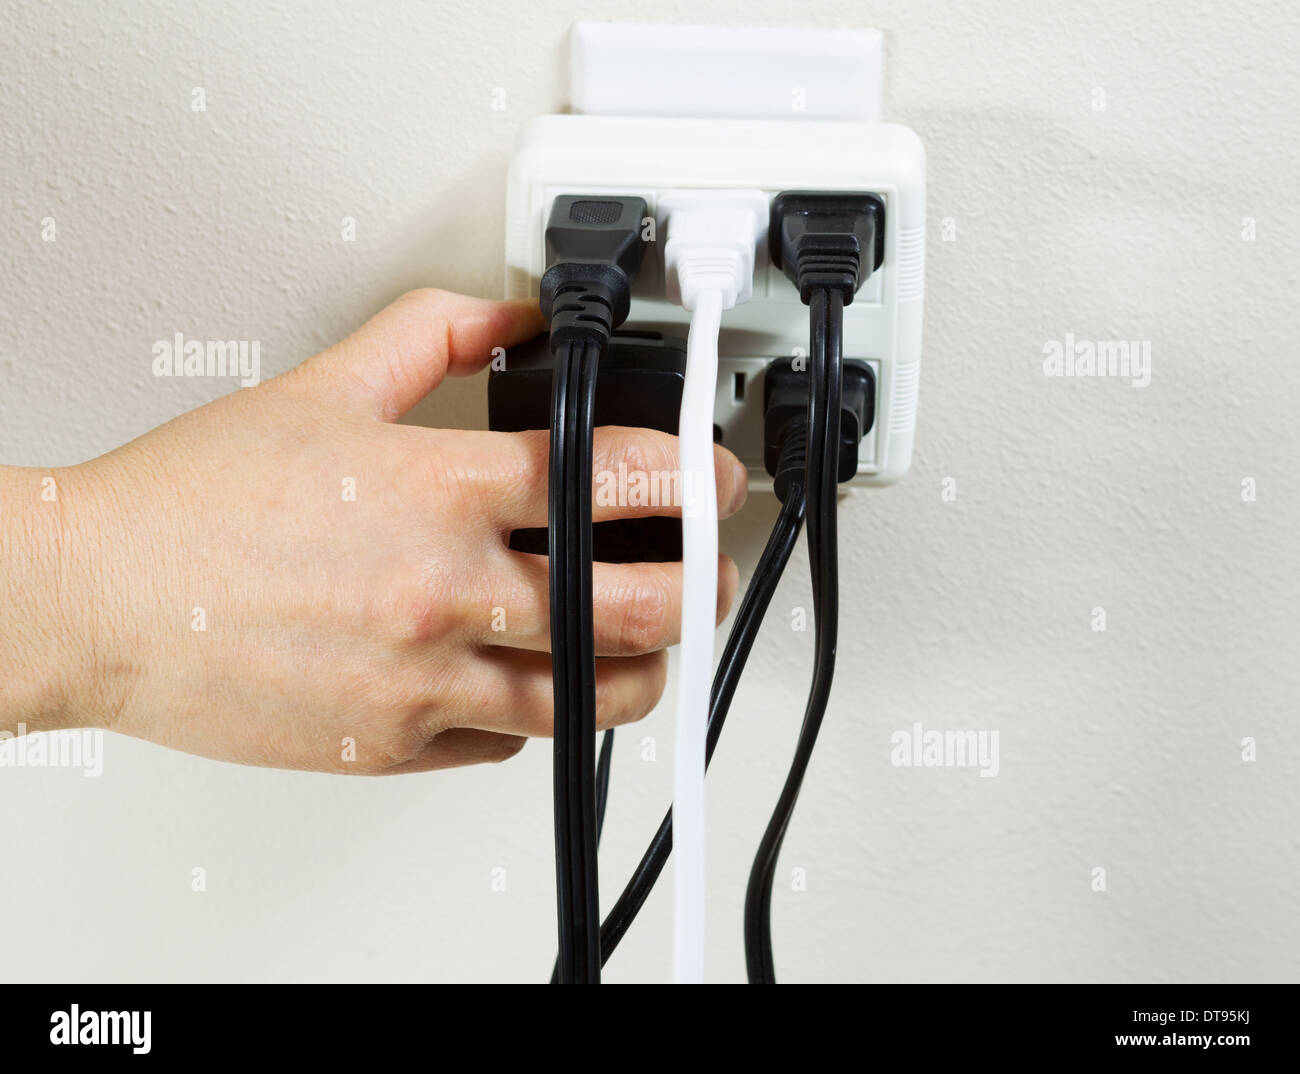 Photo of female hand plugging in power adapter into multiple electrical wall unit outlets Stock Photo